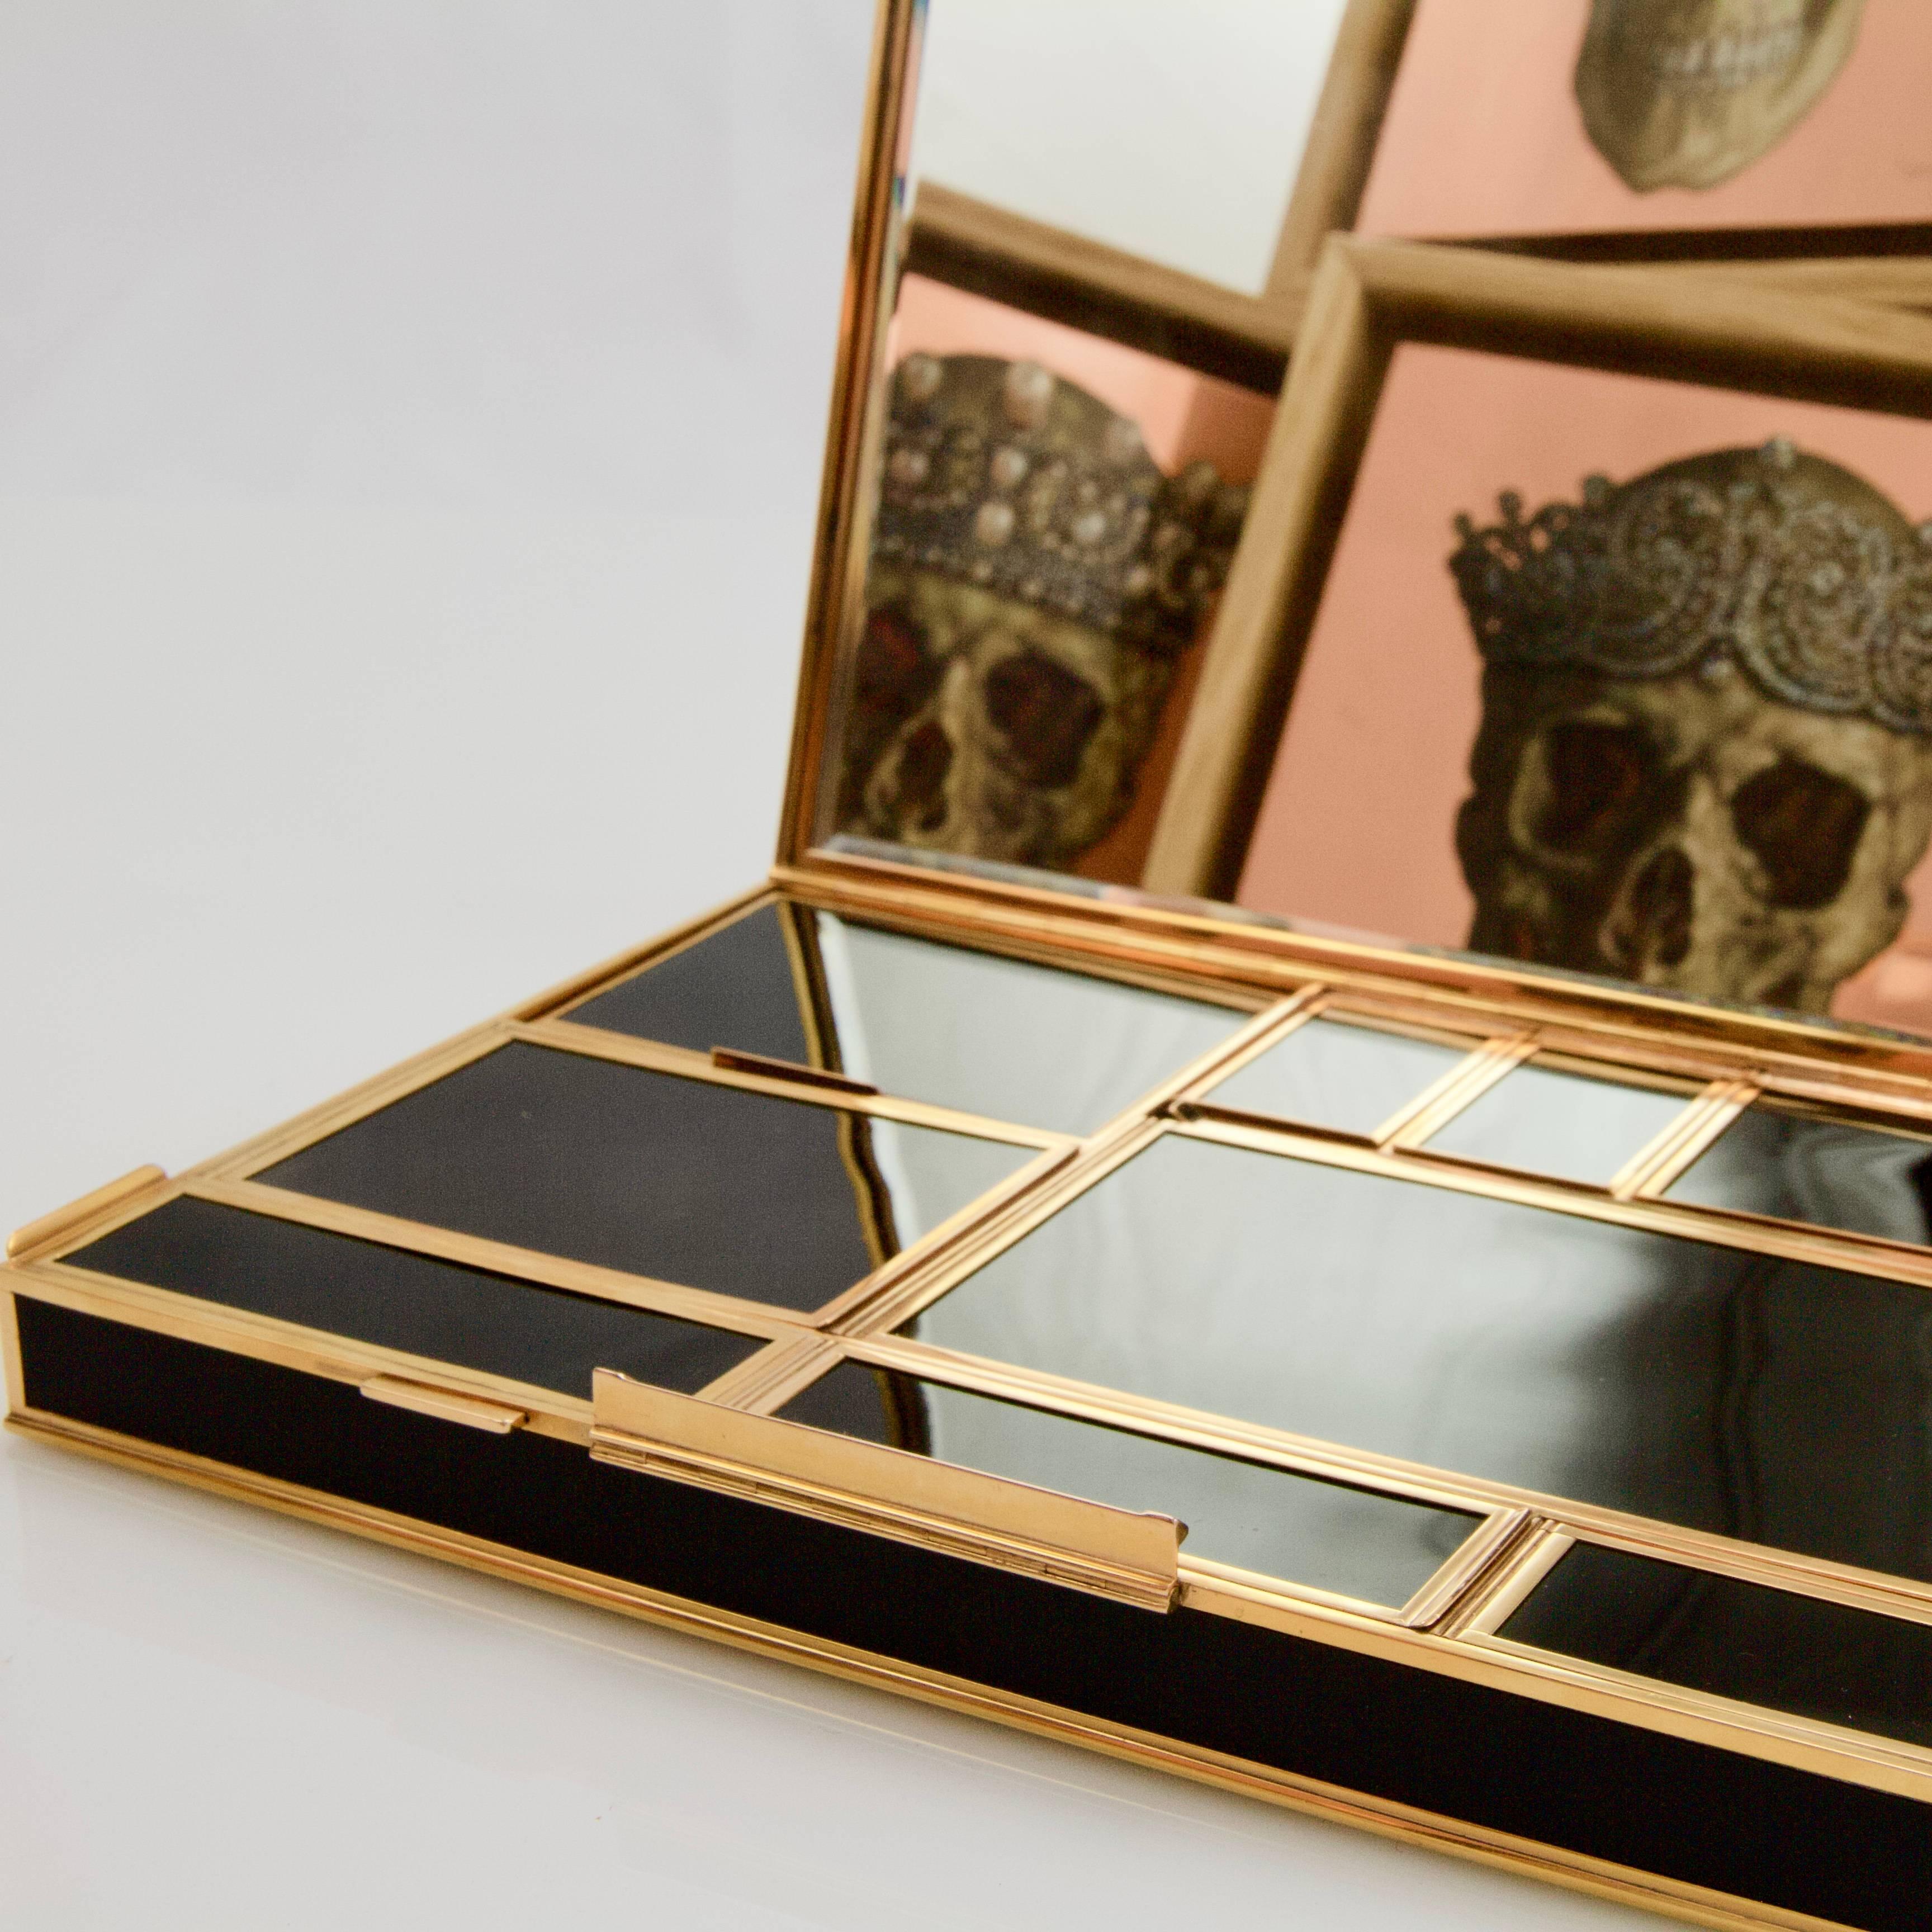 Original entire rectangular minaudière in black lacquer and gold.
Comprising a mirror and nine compartments for beauty makeup as lipstick and cream, including separately a powder box, a comb, a lighter, a fume-cigarette. Fume-cigarette and lighter